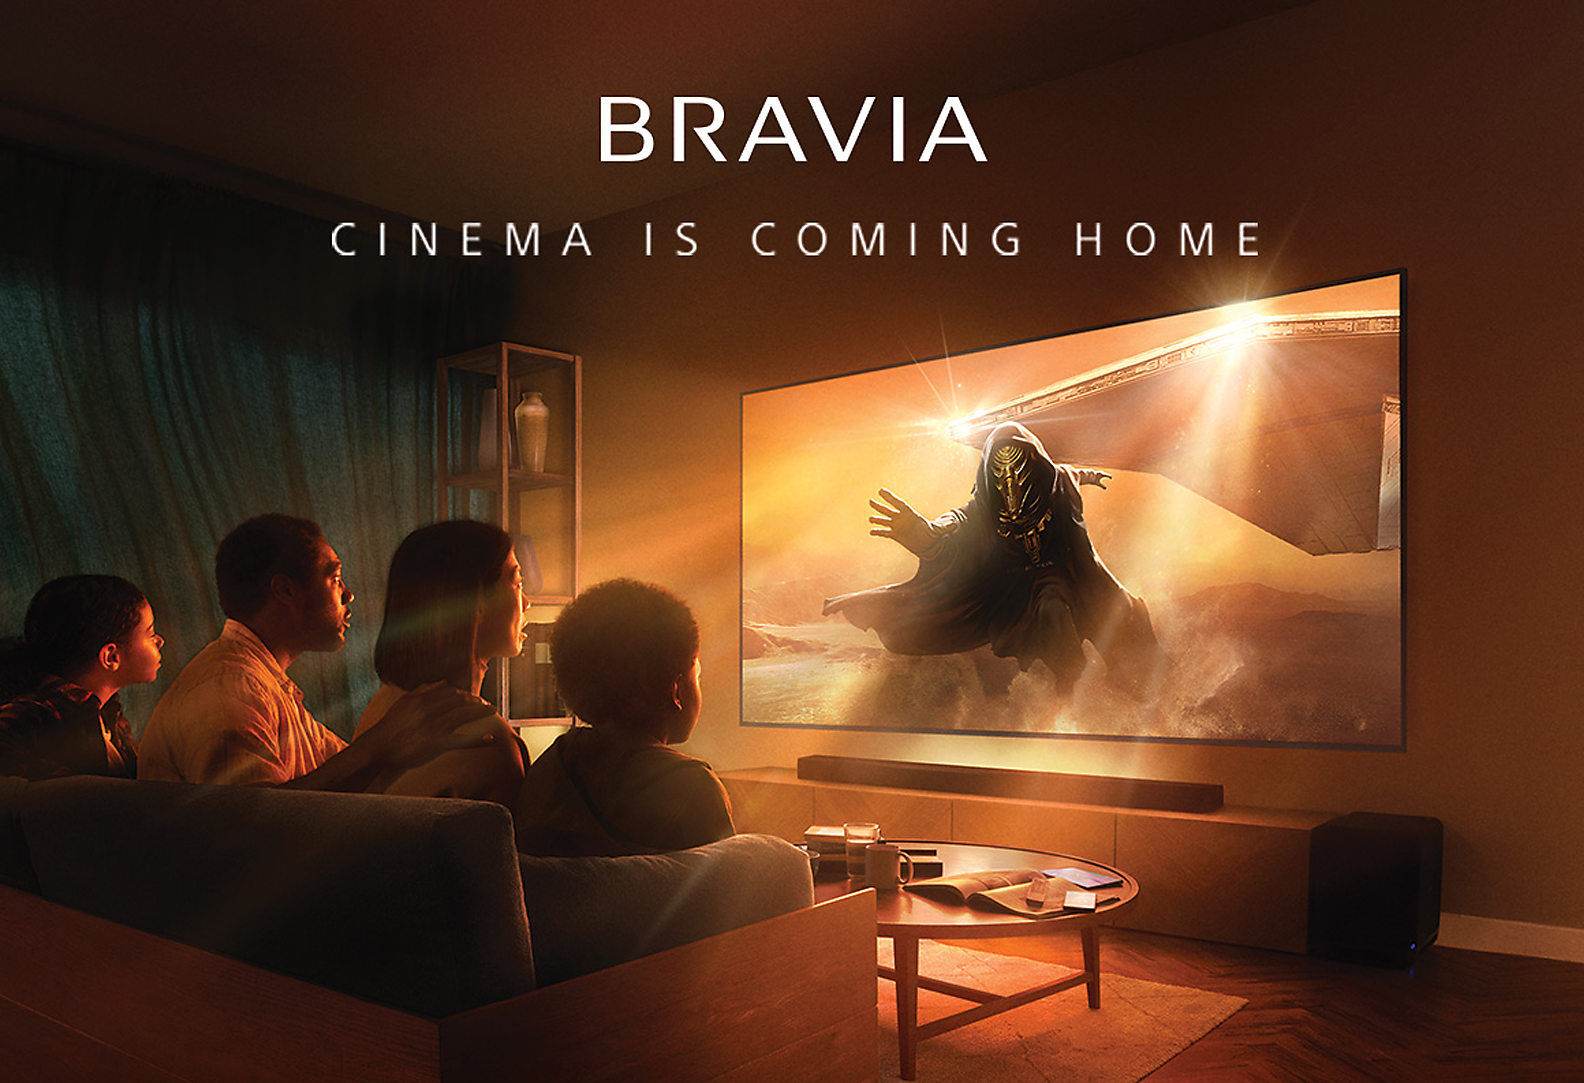 Living room scene with four people sitting on a sofa and wall-mounted TV and soundbar with screenshot of a futuristic masked and cloaked villain stepping through orange mist with spaceship in the background, to the bottom of the image the words BRAVIA and cinema is coming home